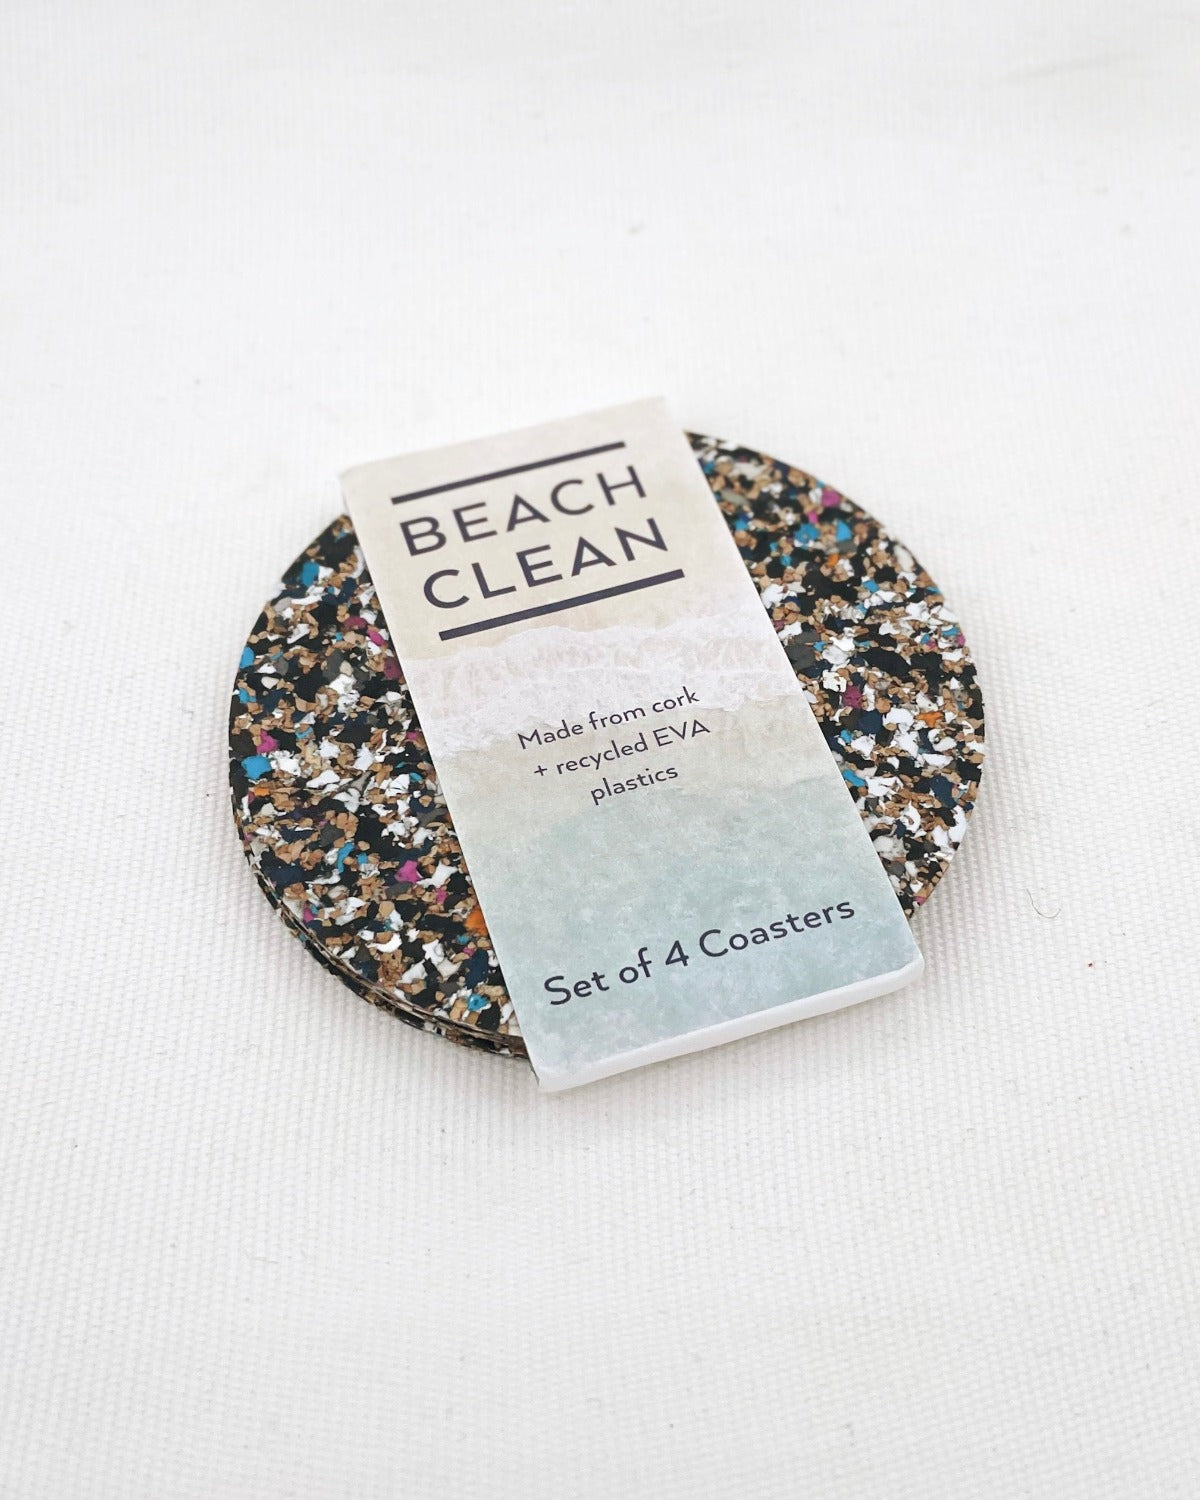 Product image of Beach Clean Coasters on a white background. The product is on an angle. They are round and multi-coloured cork. There is a belly band around the coasters vertically. It is pink and blue with the Beach Clean logo in blue font along with descriptive text.